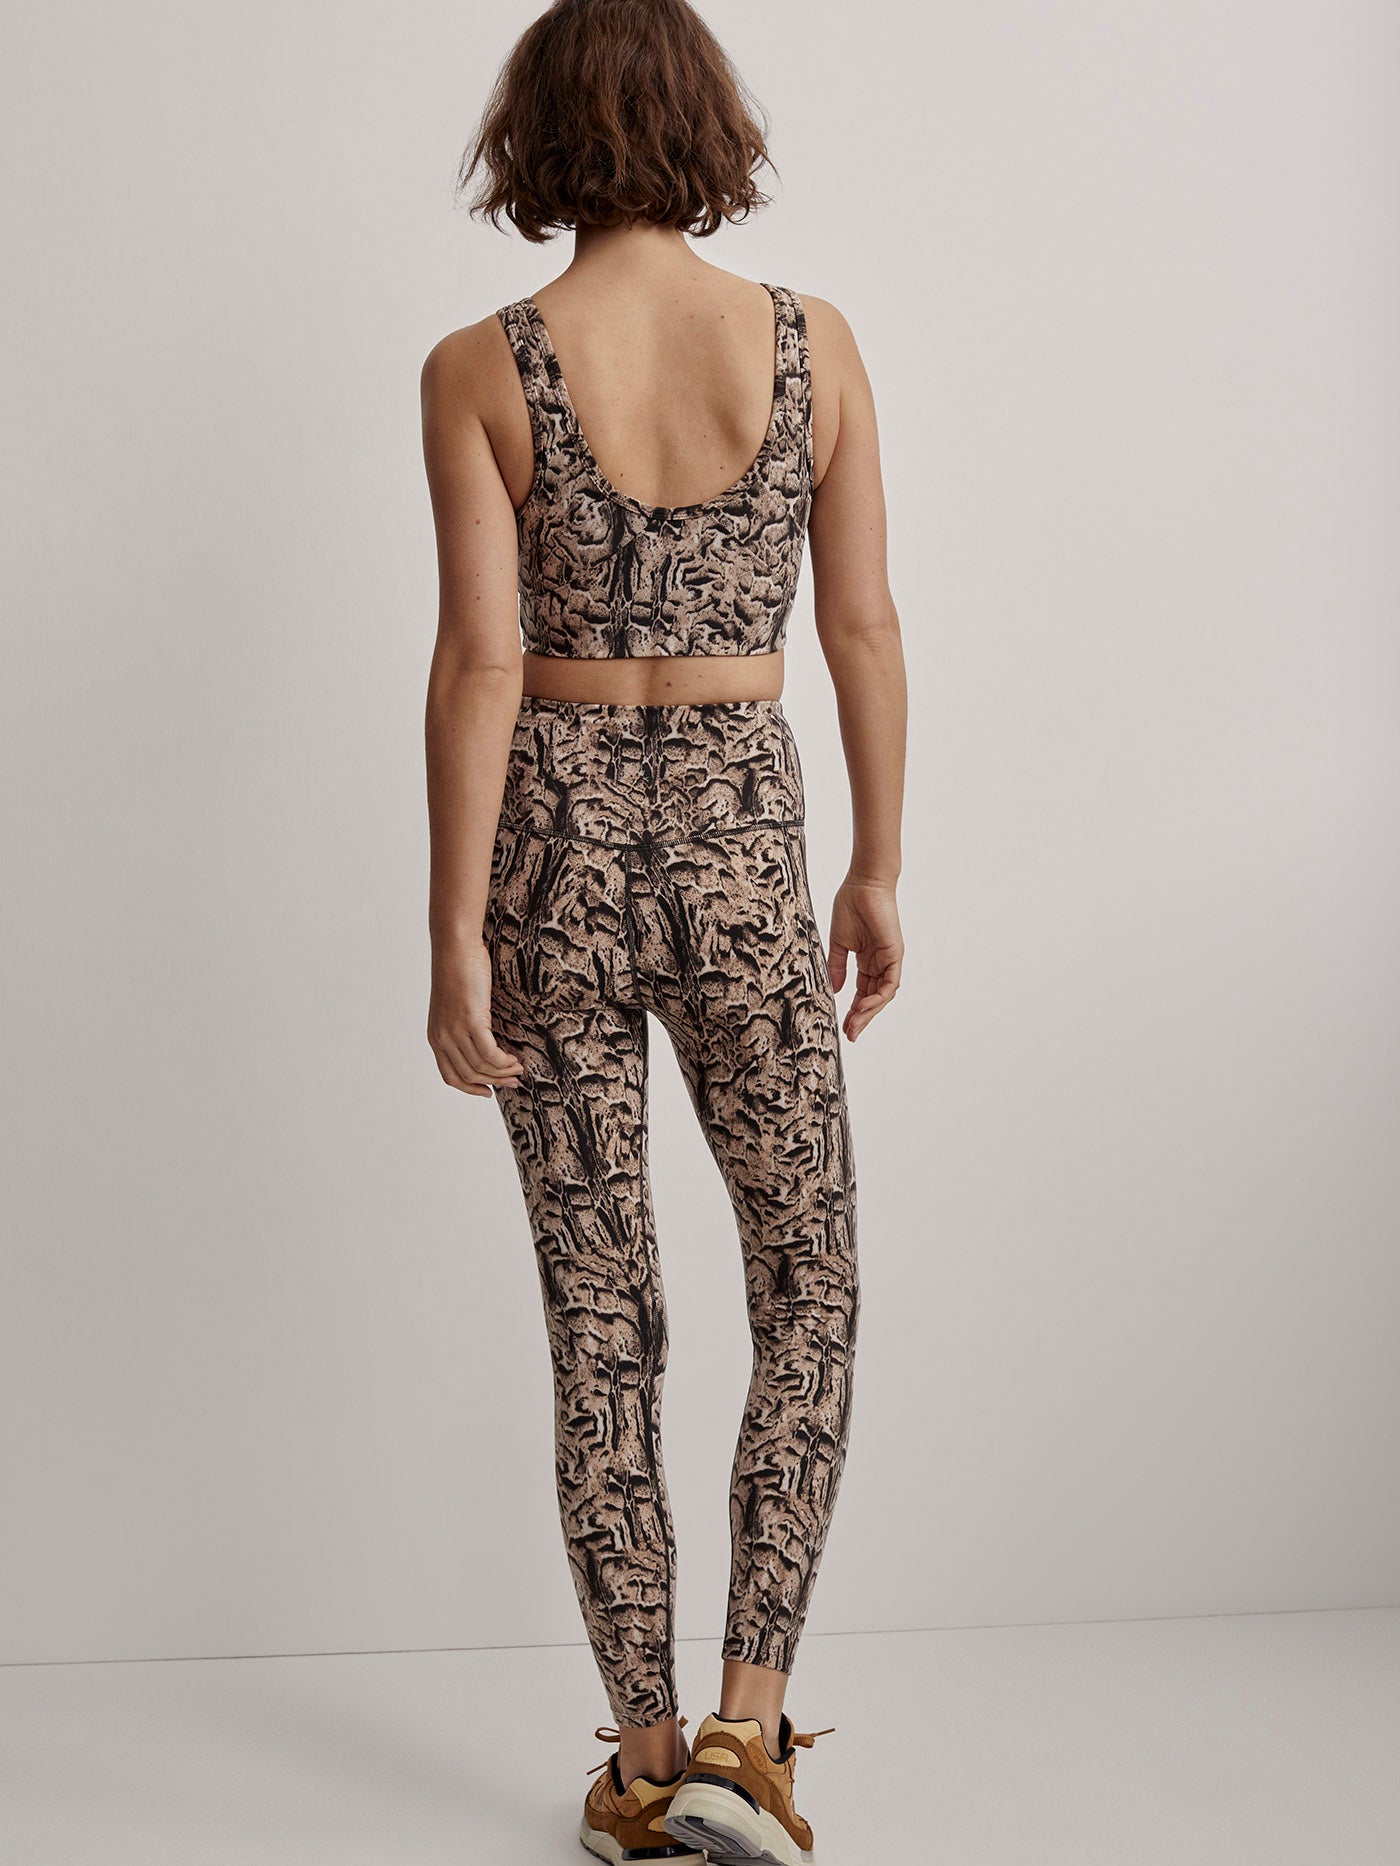 Varley Let's Move Super High Rise Legging – Luxe Leopard